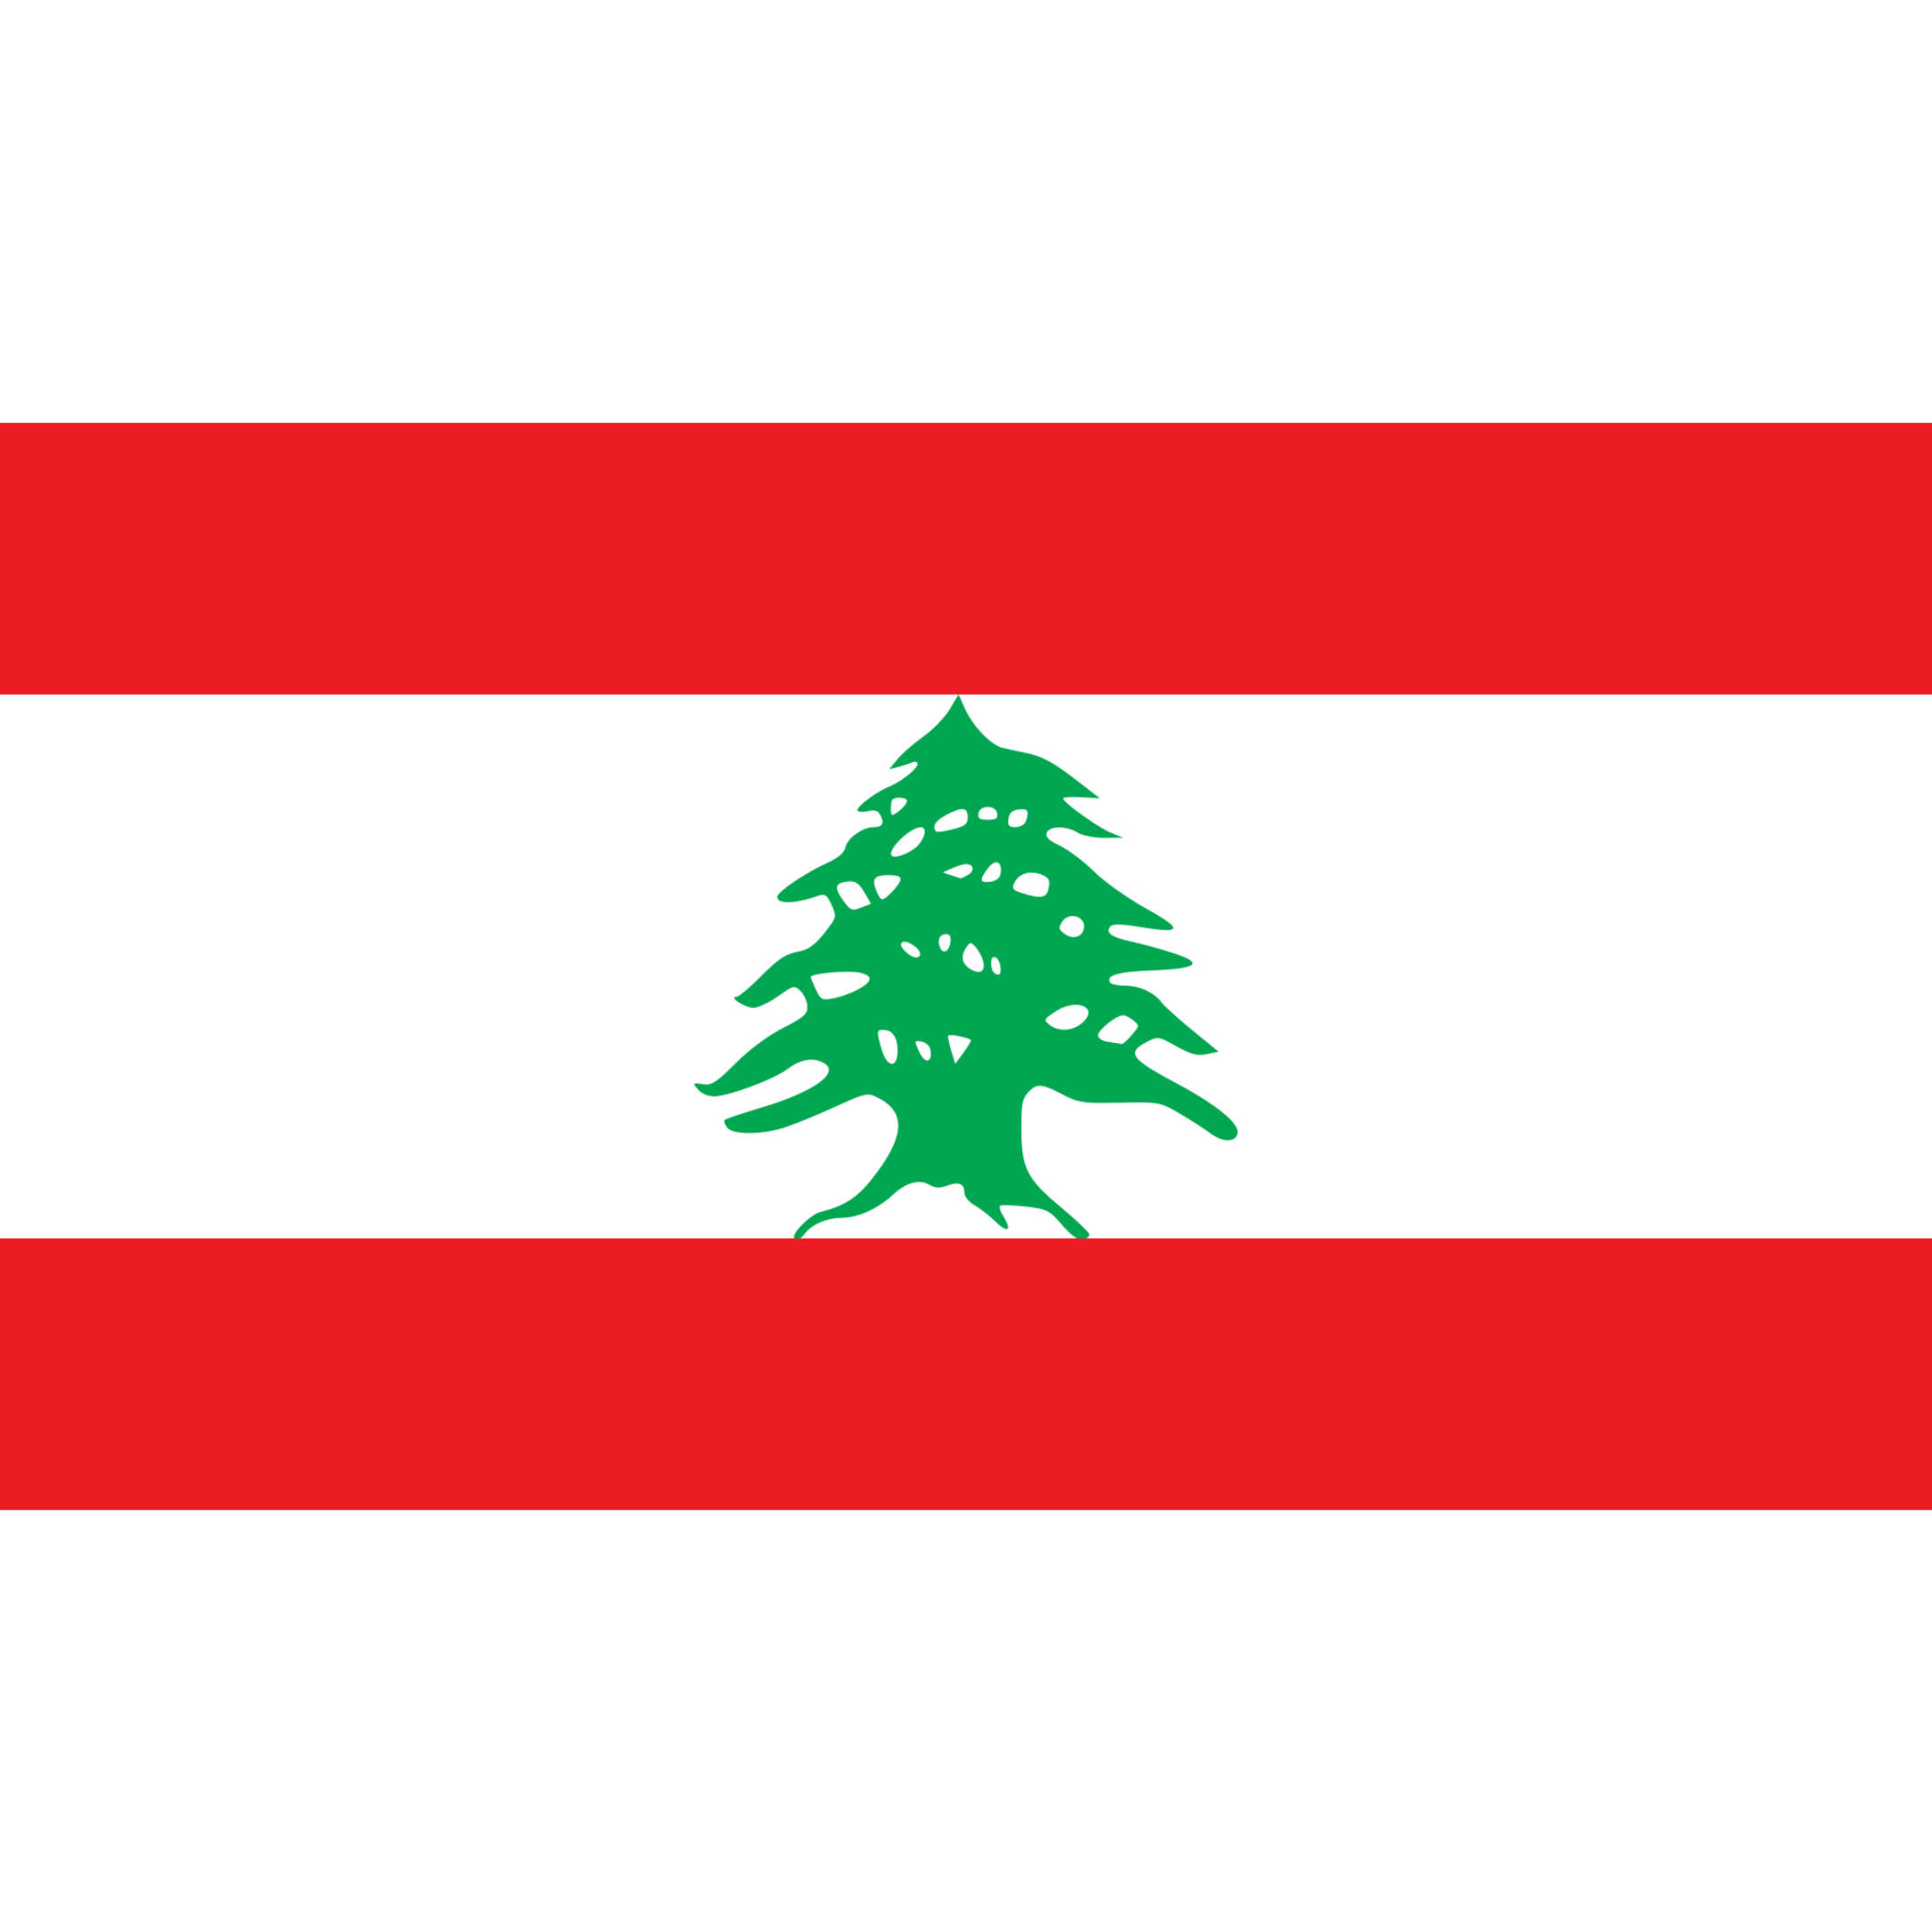 The flag of Lebanon has two horizontal red stripes above and below a white band, with a green cedar tree in the middle.